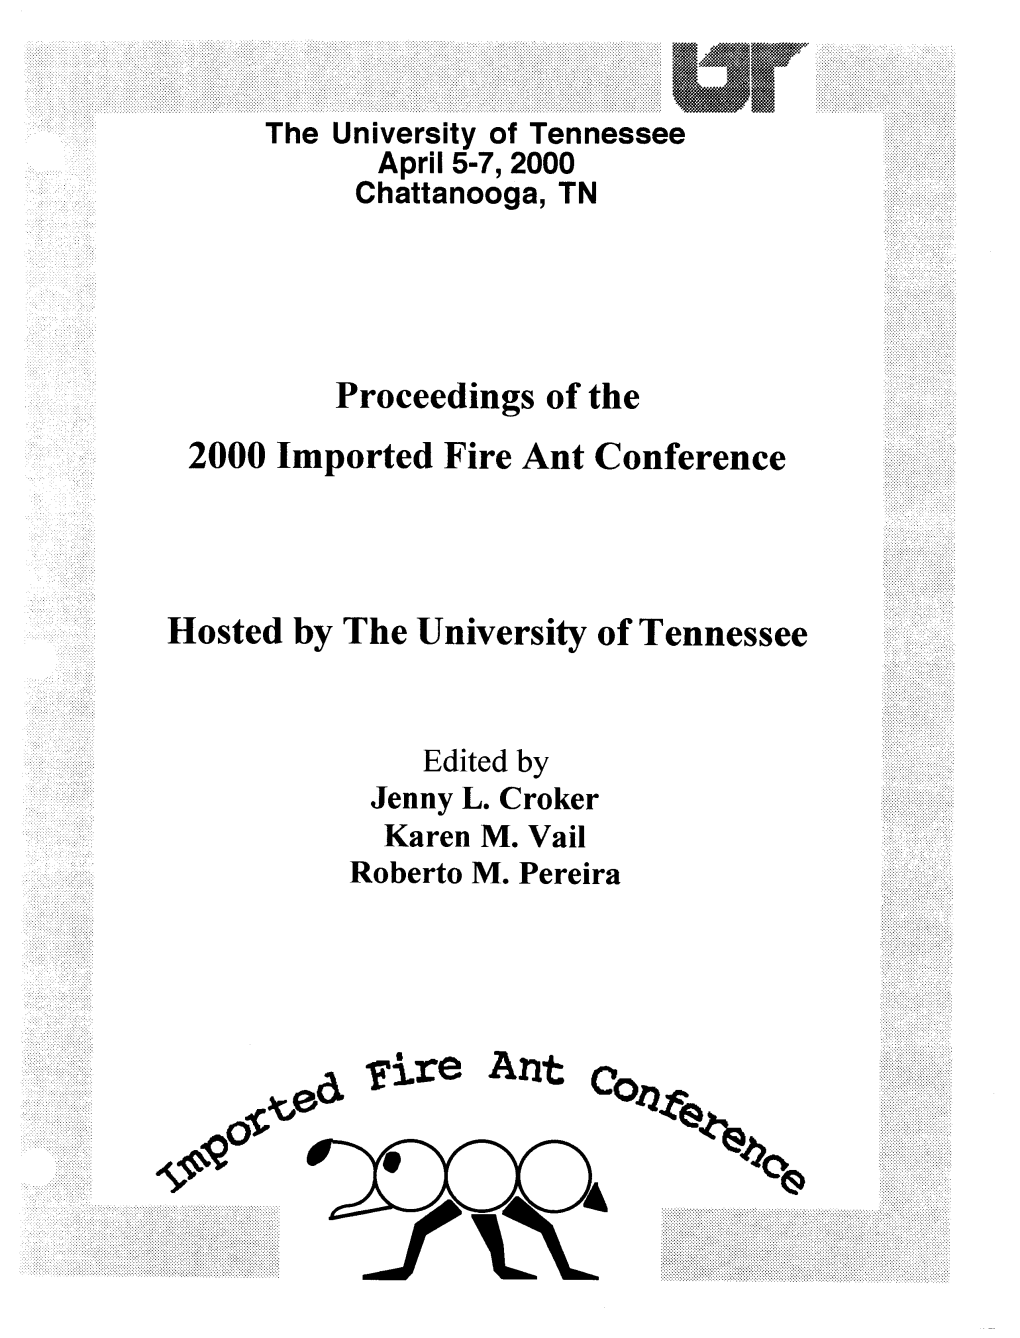 2000 Imported Fire Ant Conference Proceedings